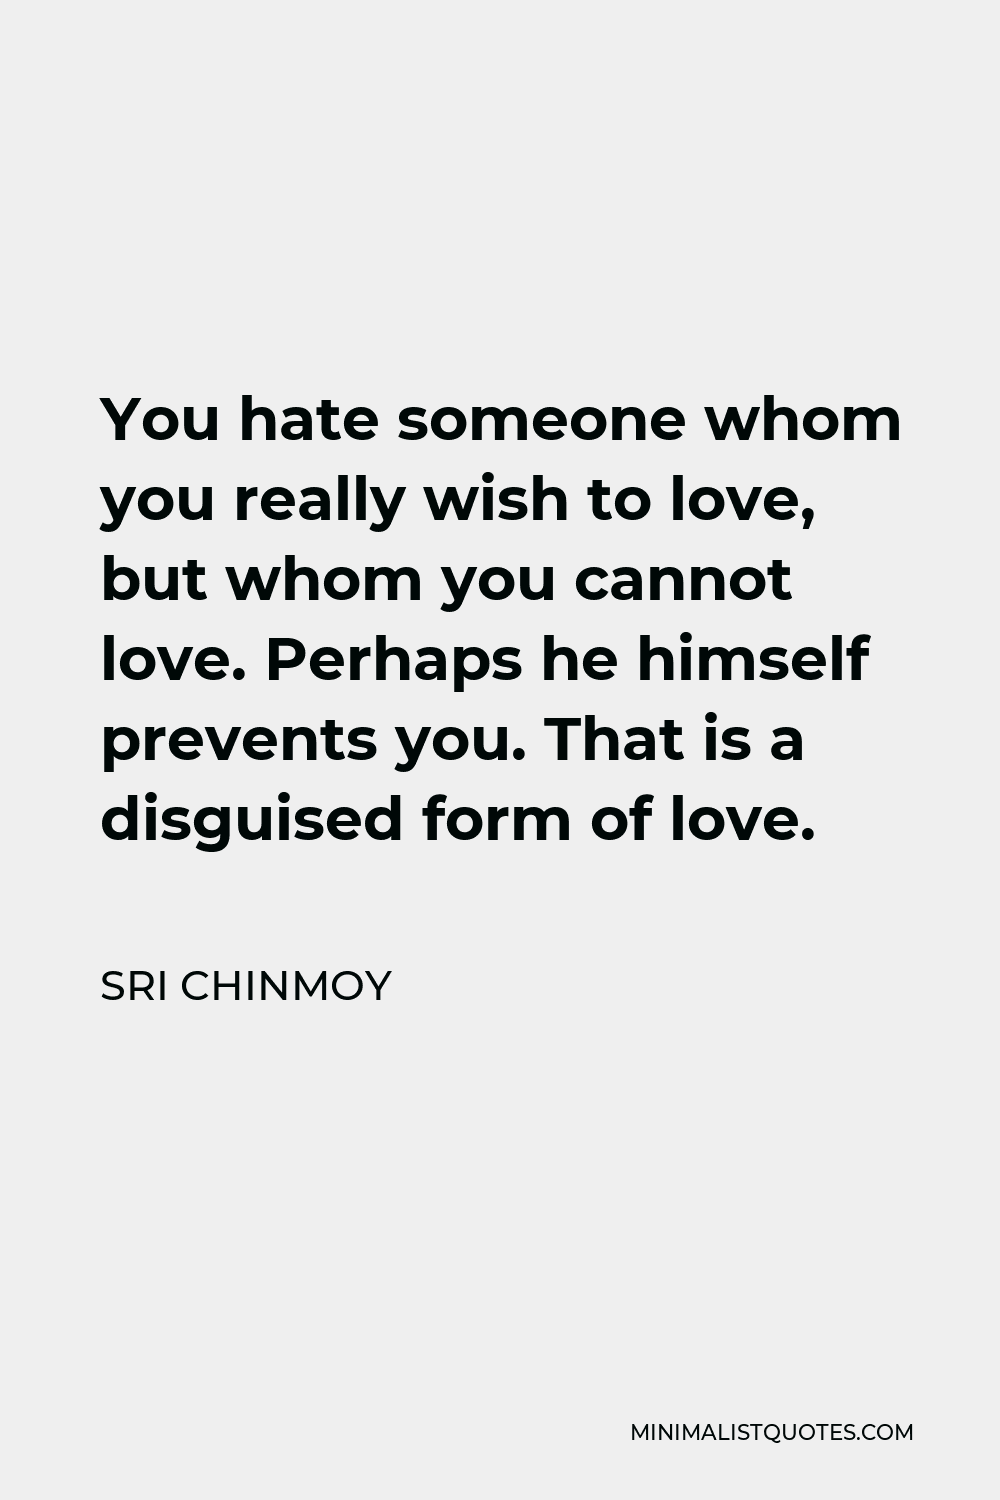 Sri Chinmoy Quote - You hate someone whom you really wish to love, but whom you cannot love. Perhaps he himself prevents you. That is a disguised form of love.